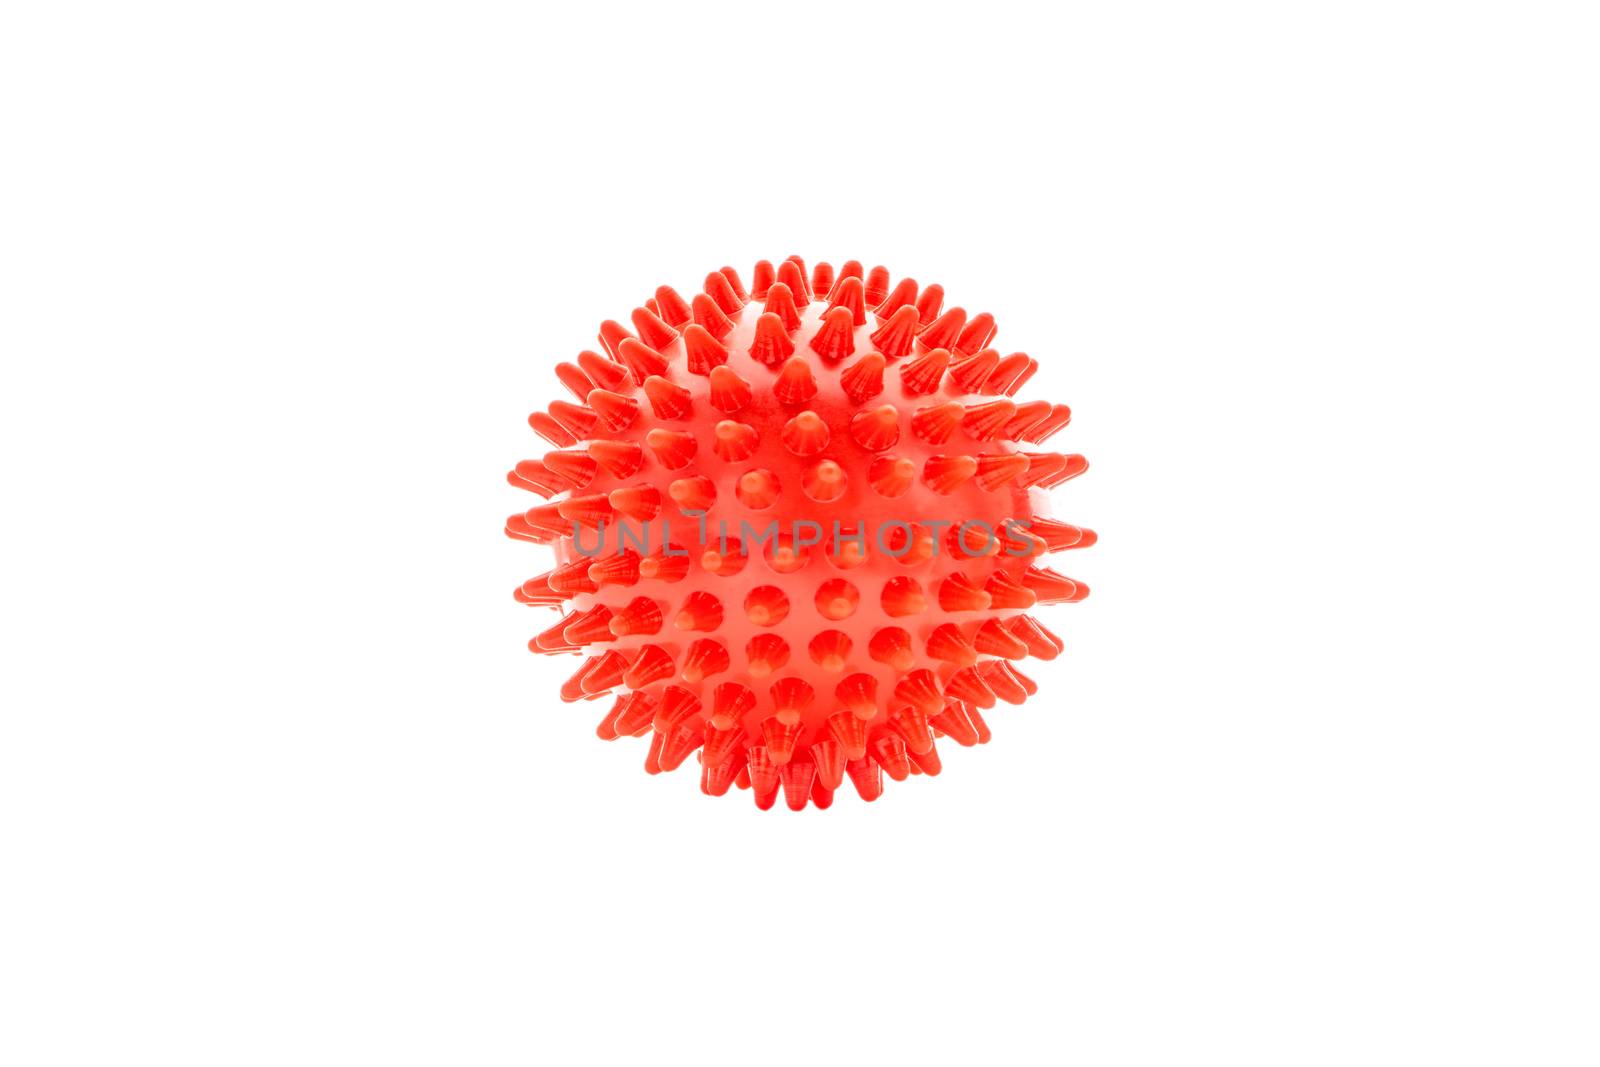 Massage ball or rubber spike ball isolated on white background by silverwings